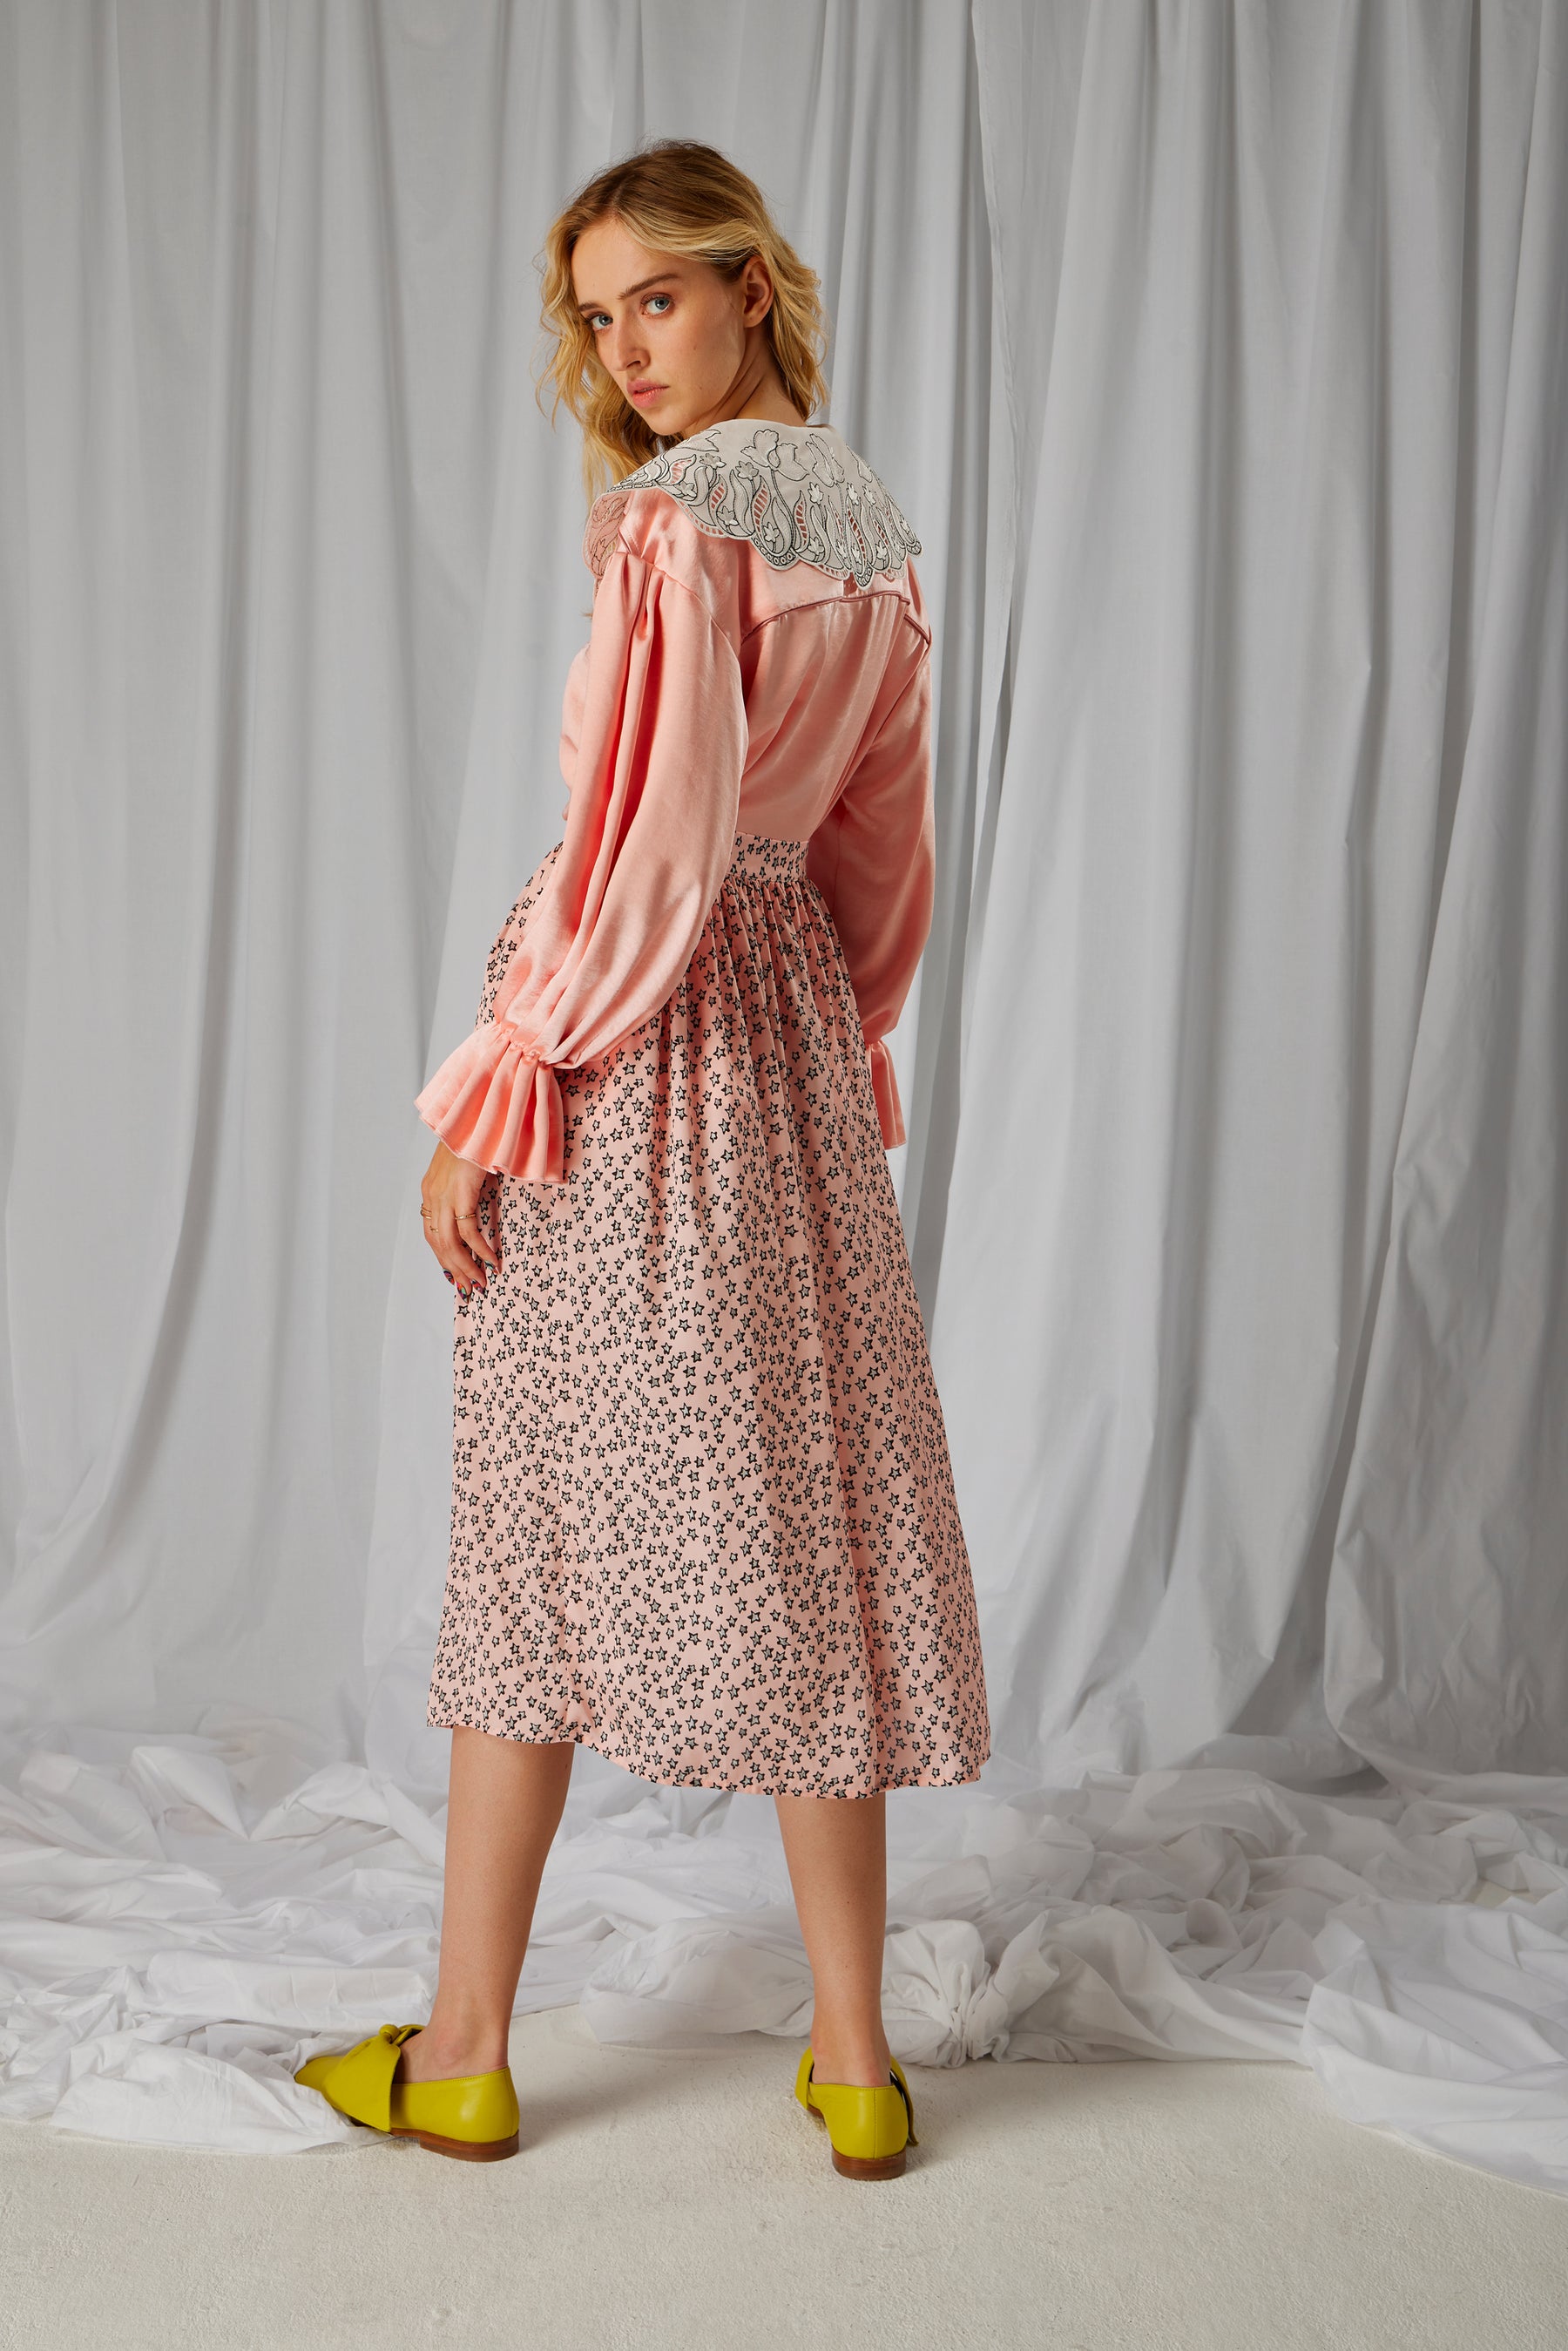 Orso skirt in pink Messy Stars print